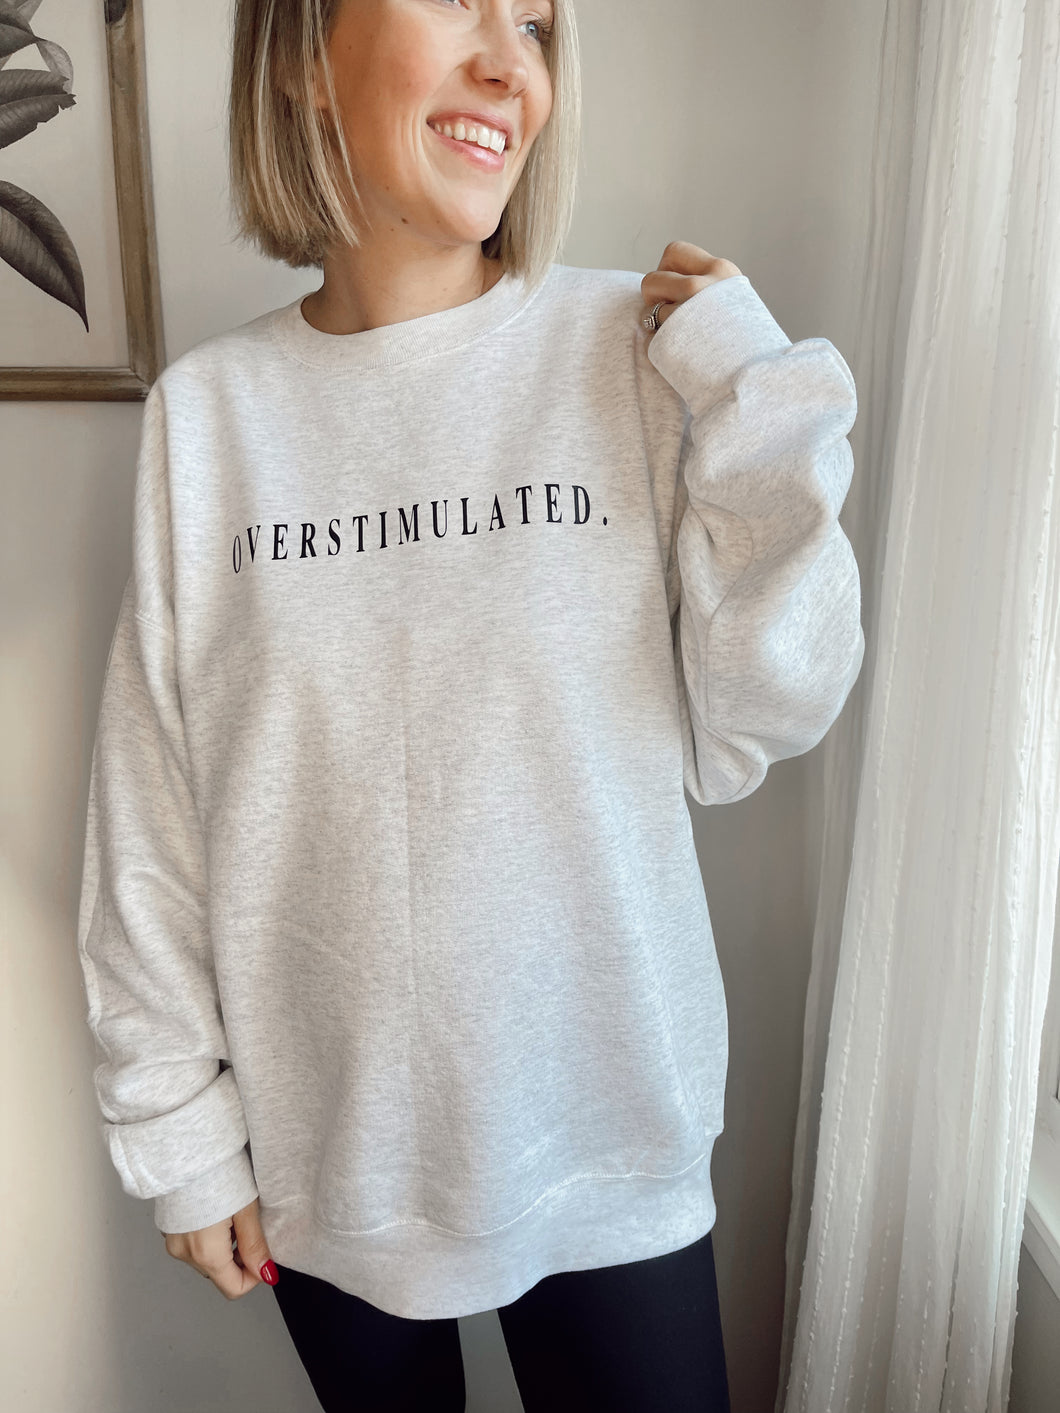 Overstimulated Pullover.